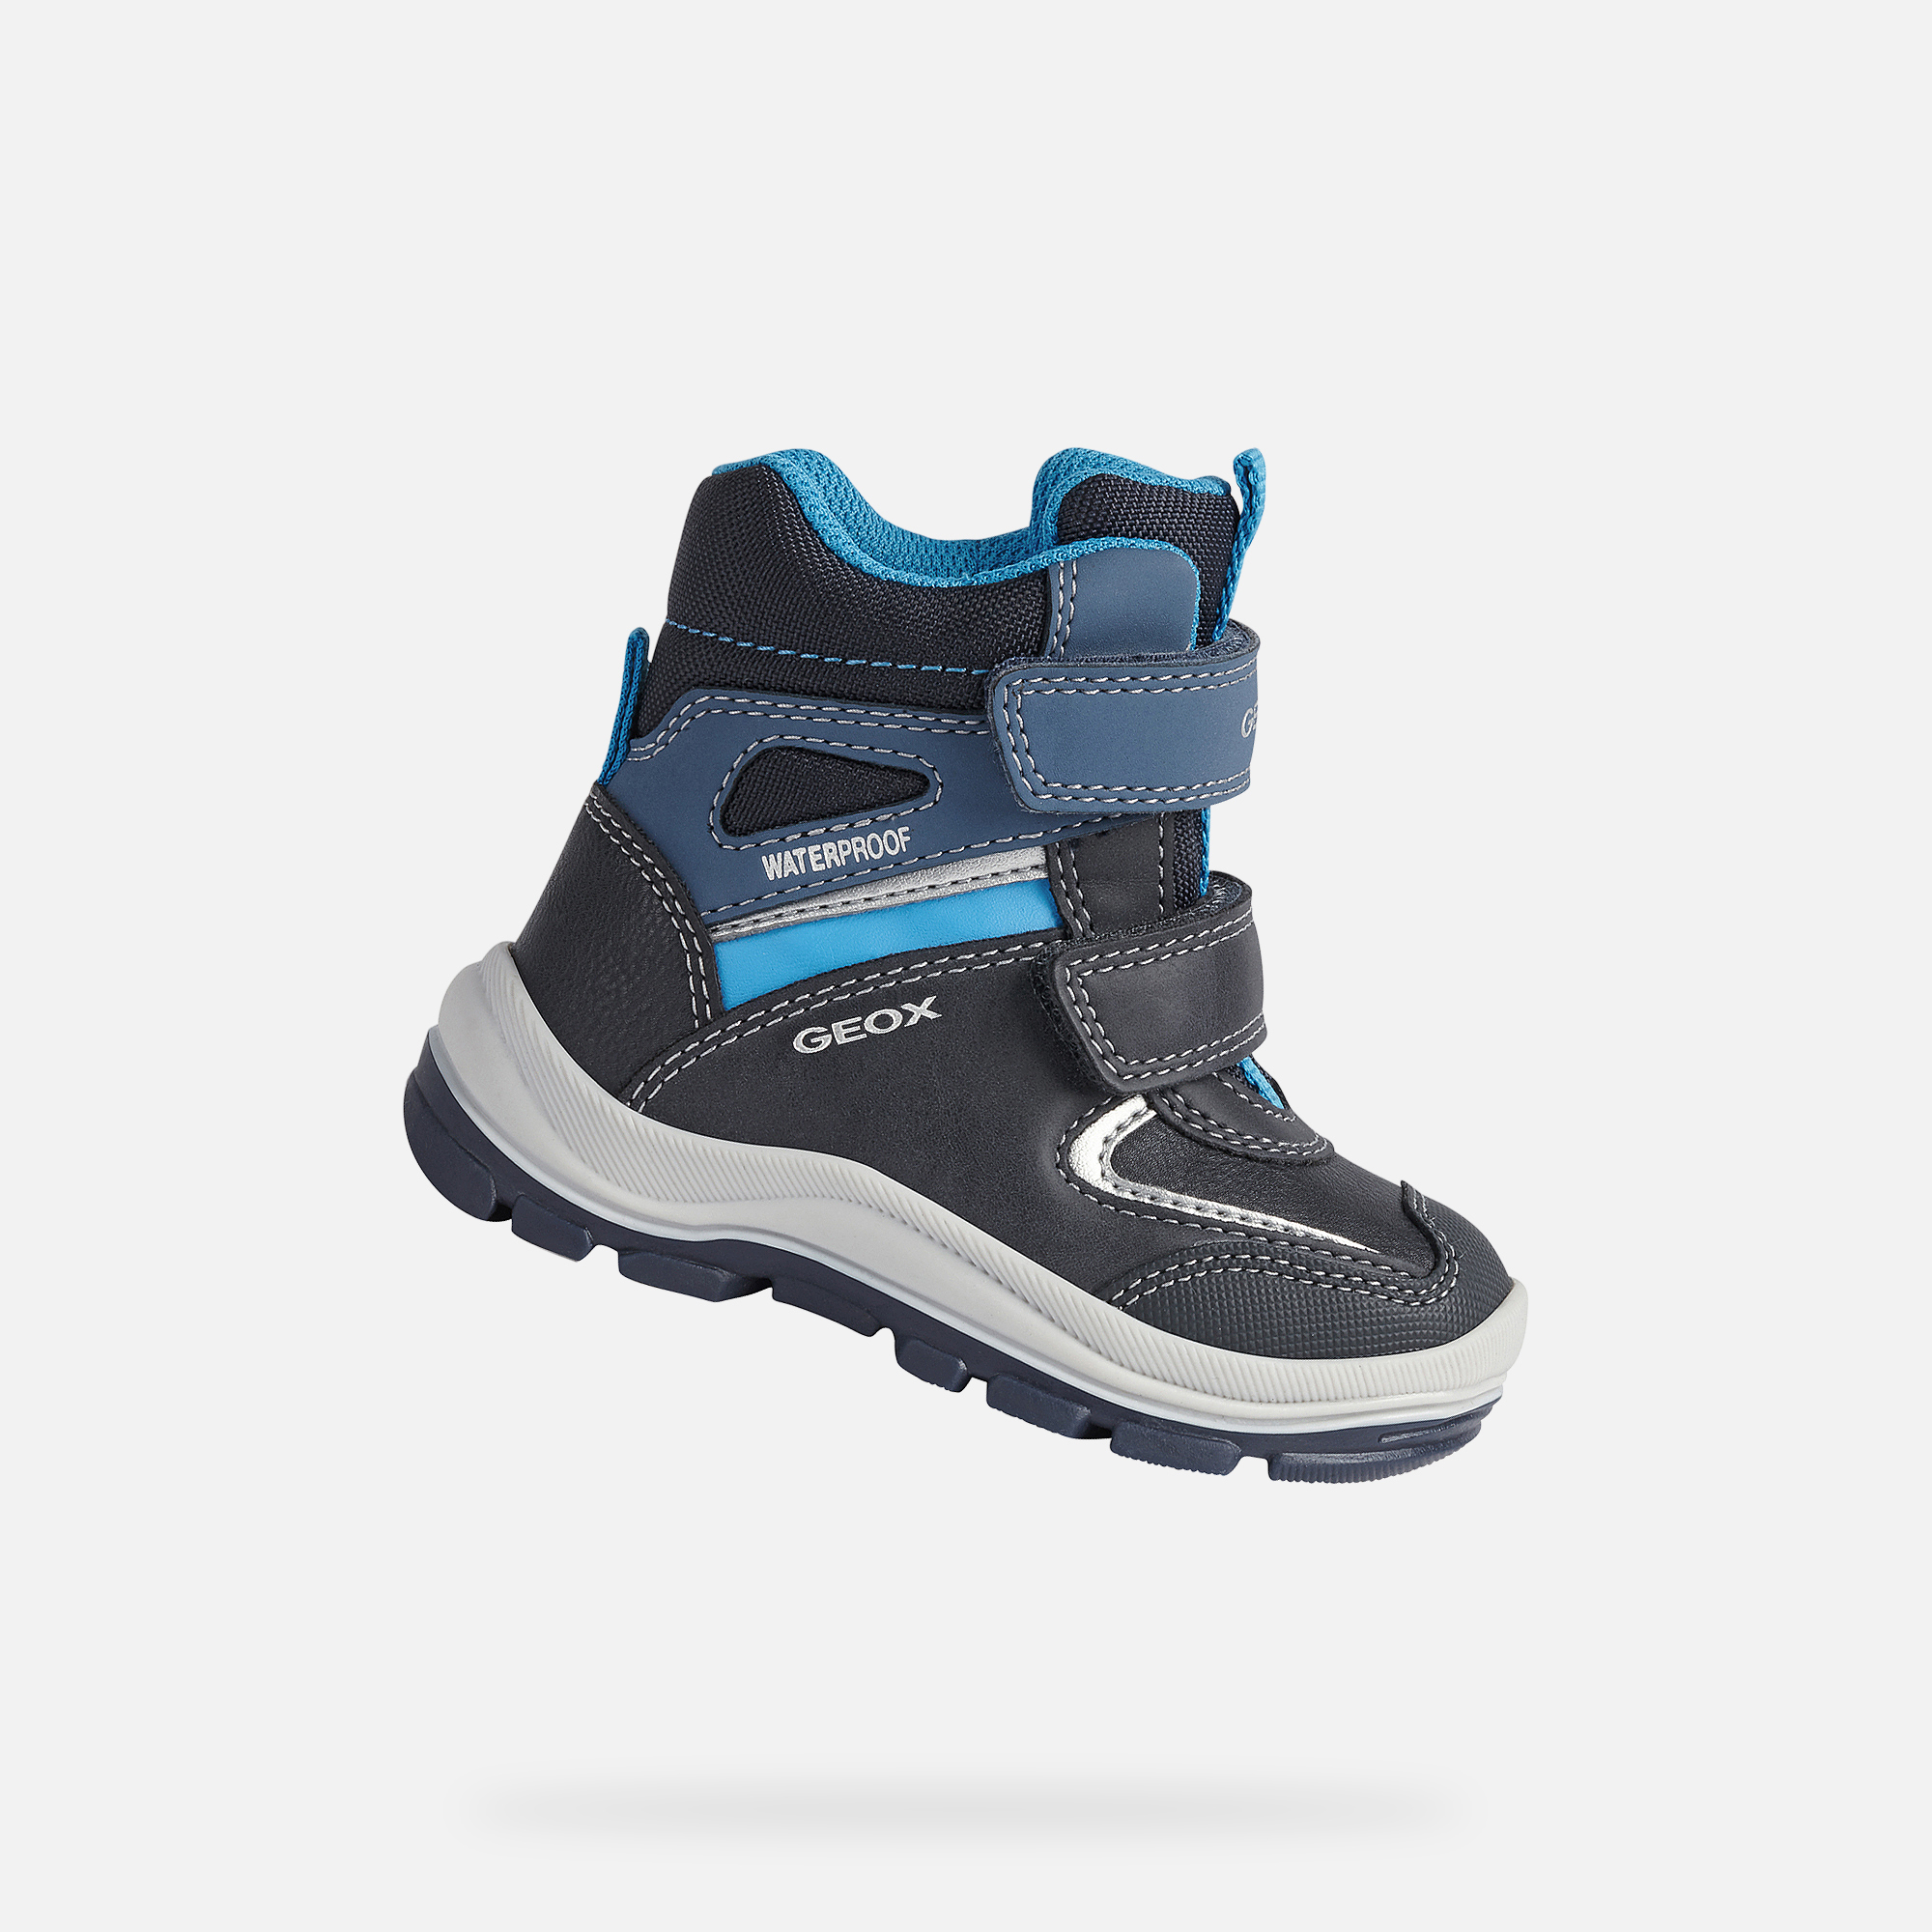 Geox® FLANFIL B WPF Baby boy: Navy blue Ankle Boots | Geox® FW21/21